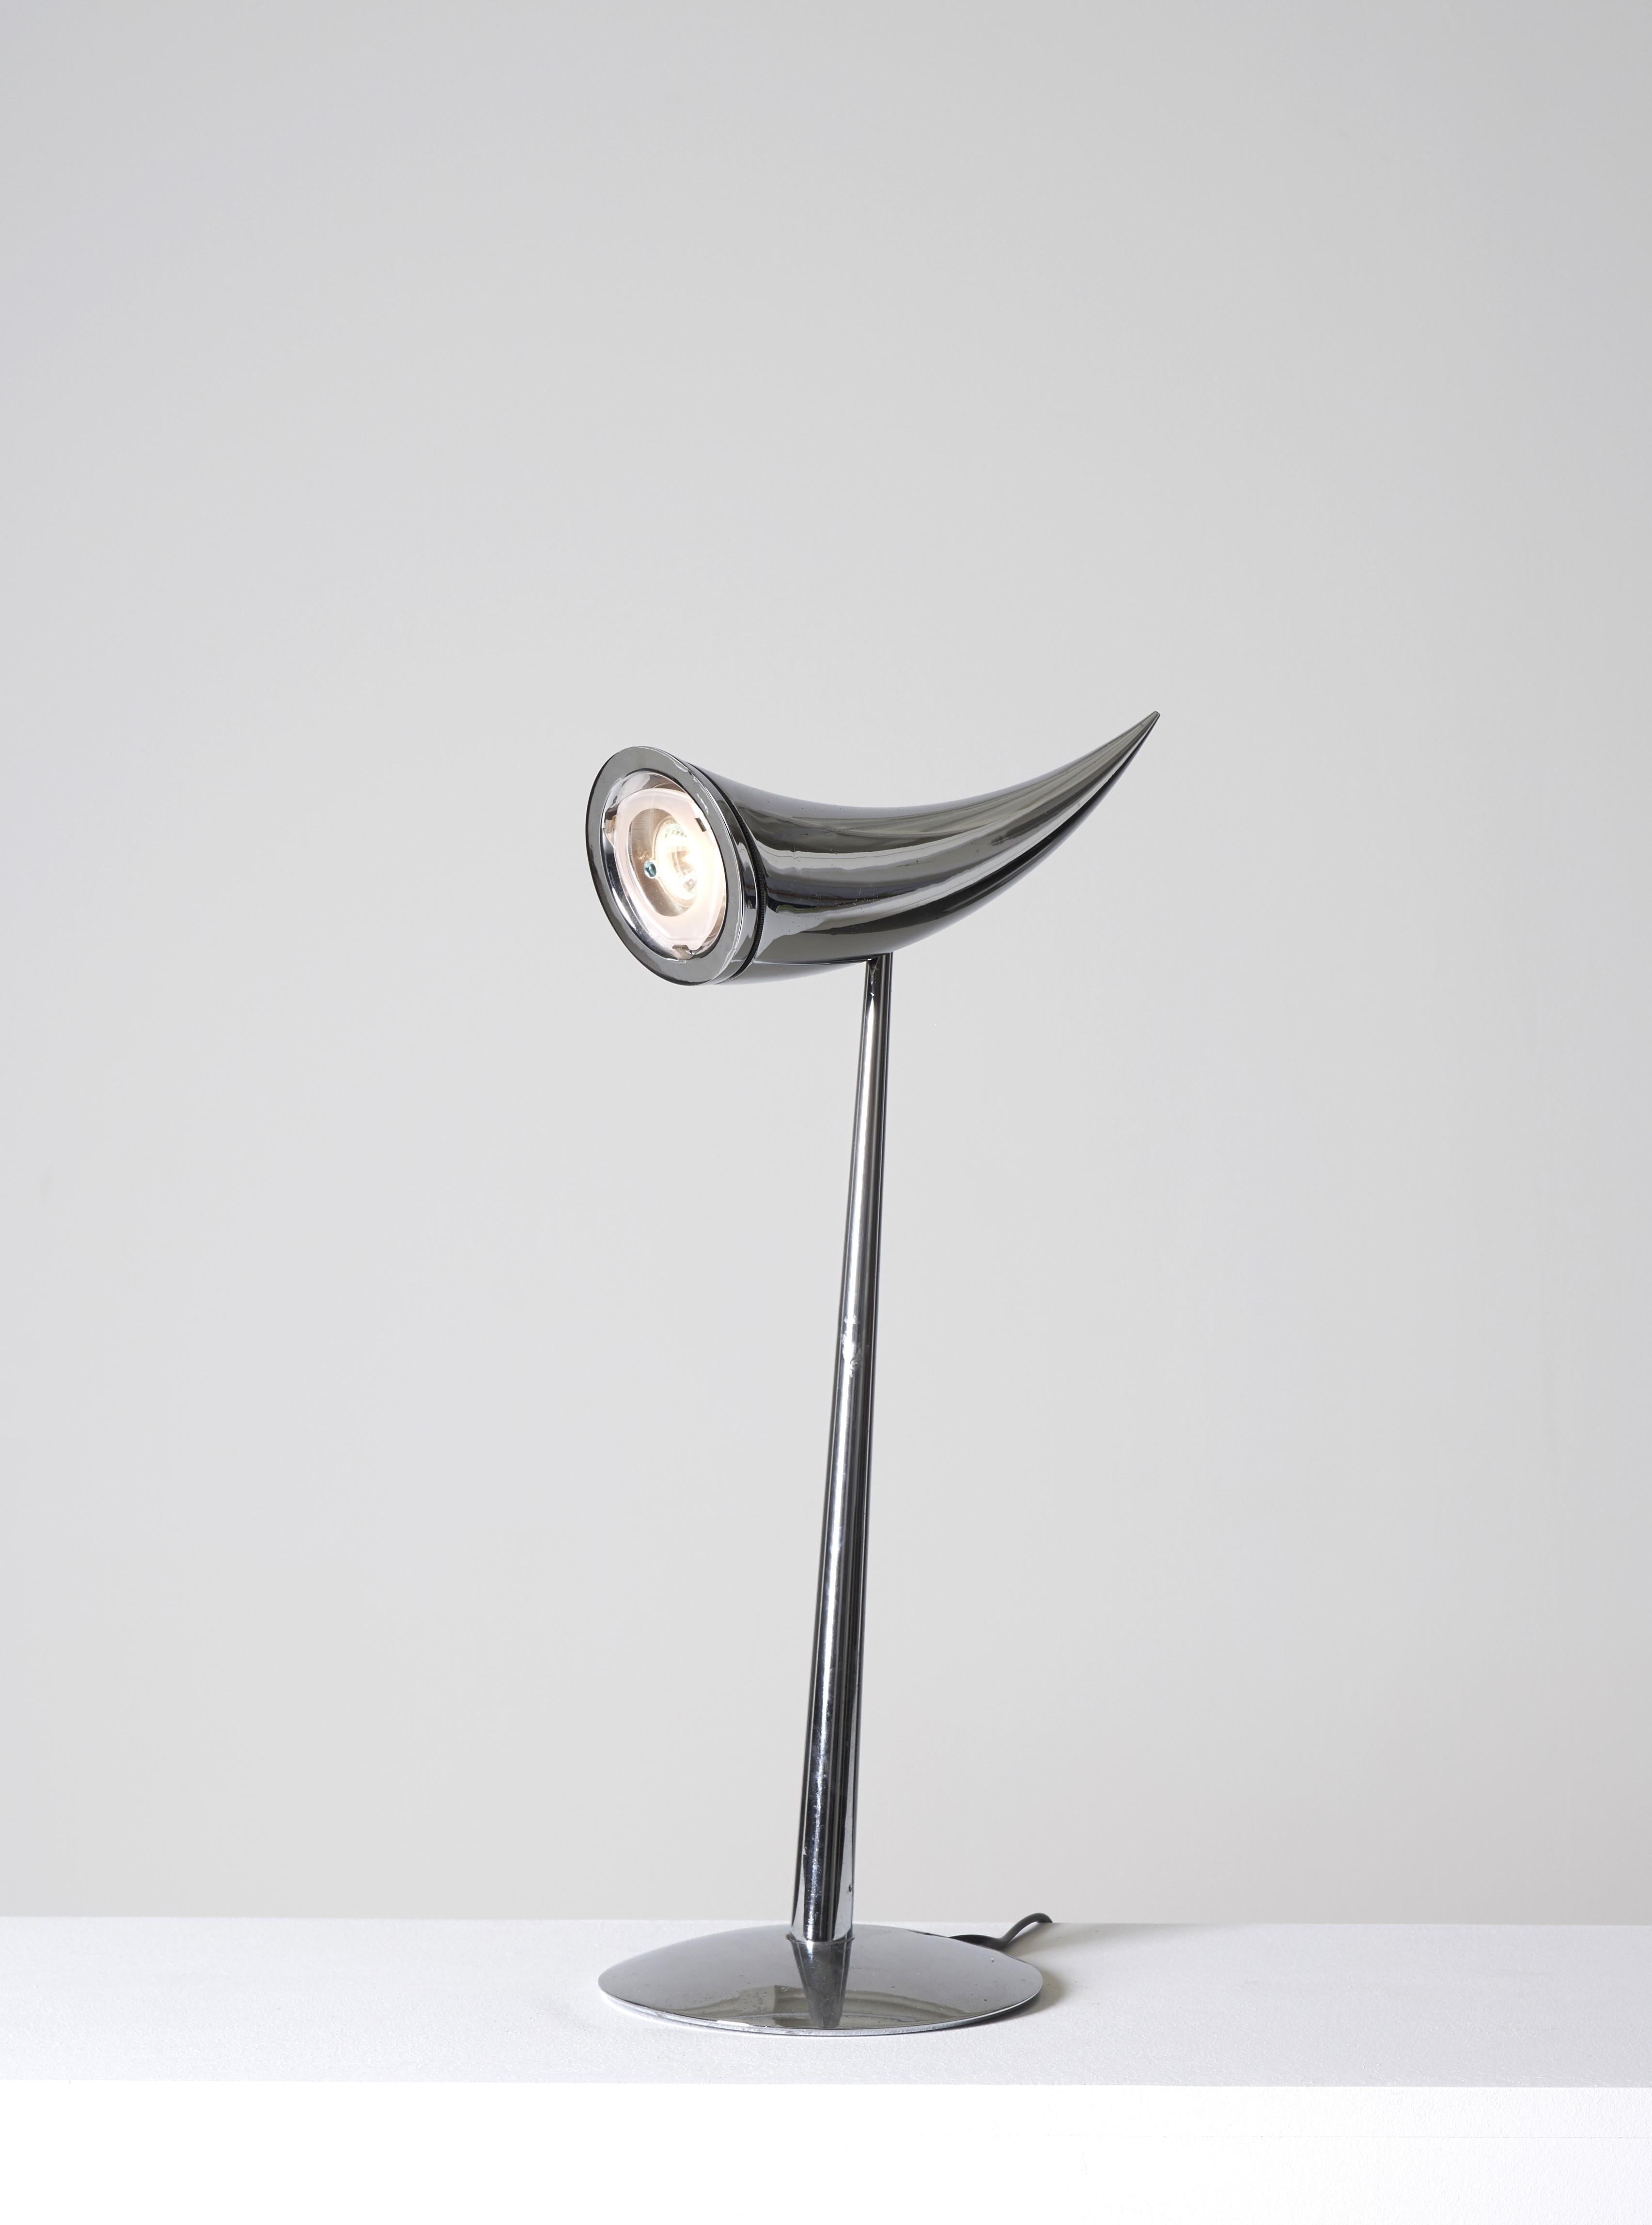 Sublime Ara Lamp designed by Philippe Starck for Flos in 1988. Dynamic and sculptural line in polished chrome. The lamp also swivels to direct the light towards a desk task or bedside reading.